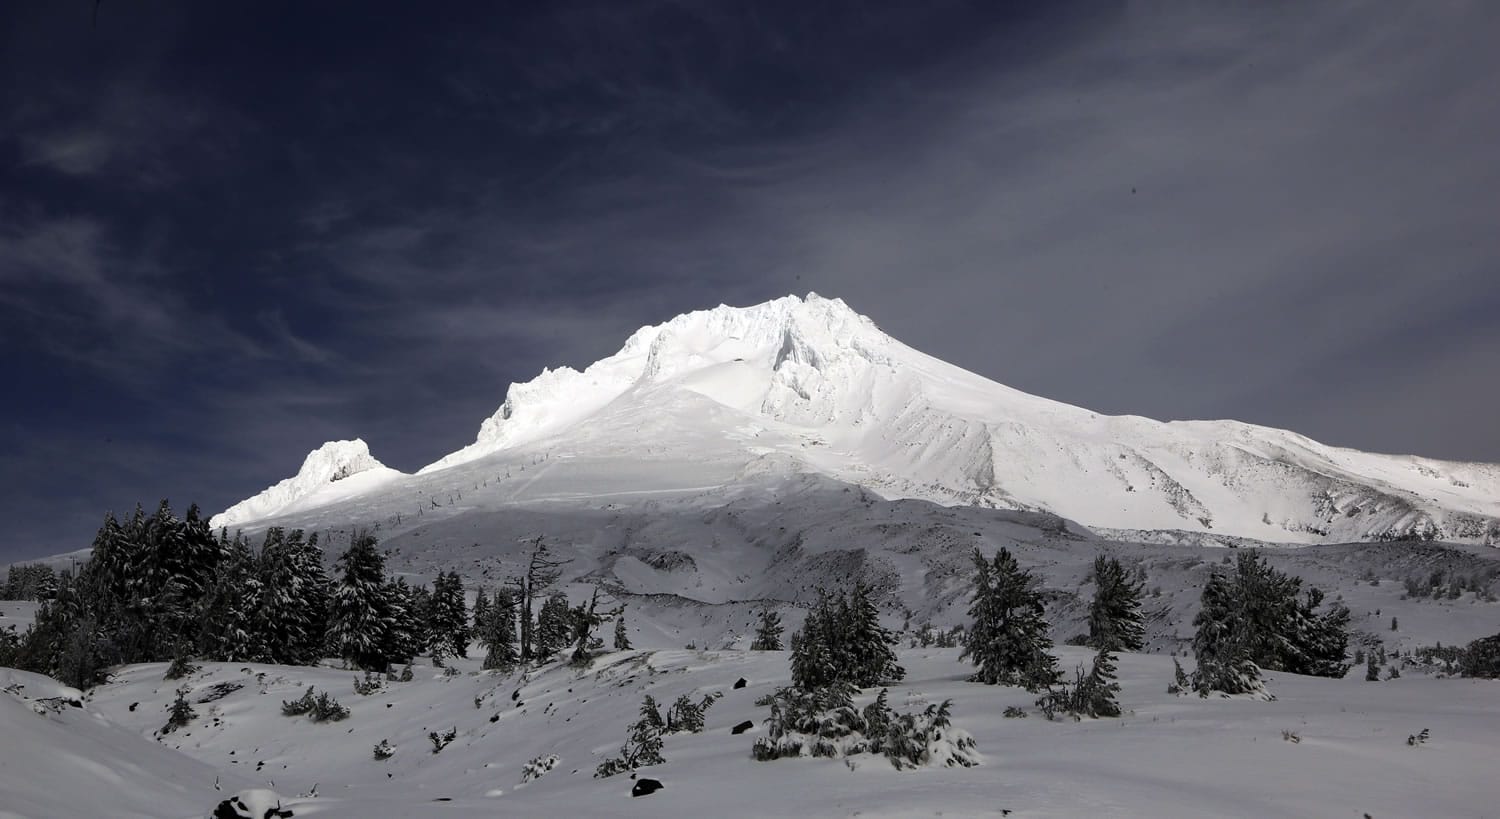 Clouds lift briefly and allow the sun to highlight Mount Hood wearing a fresh coat of snow in October near Government Camp, Ore.